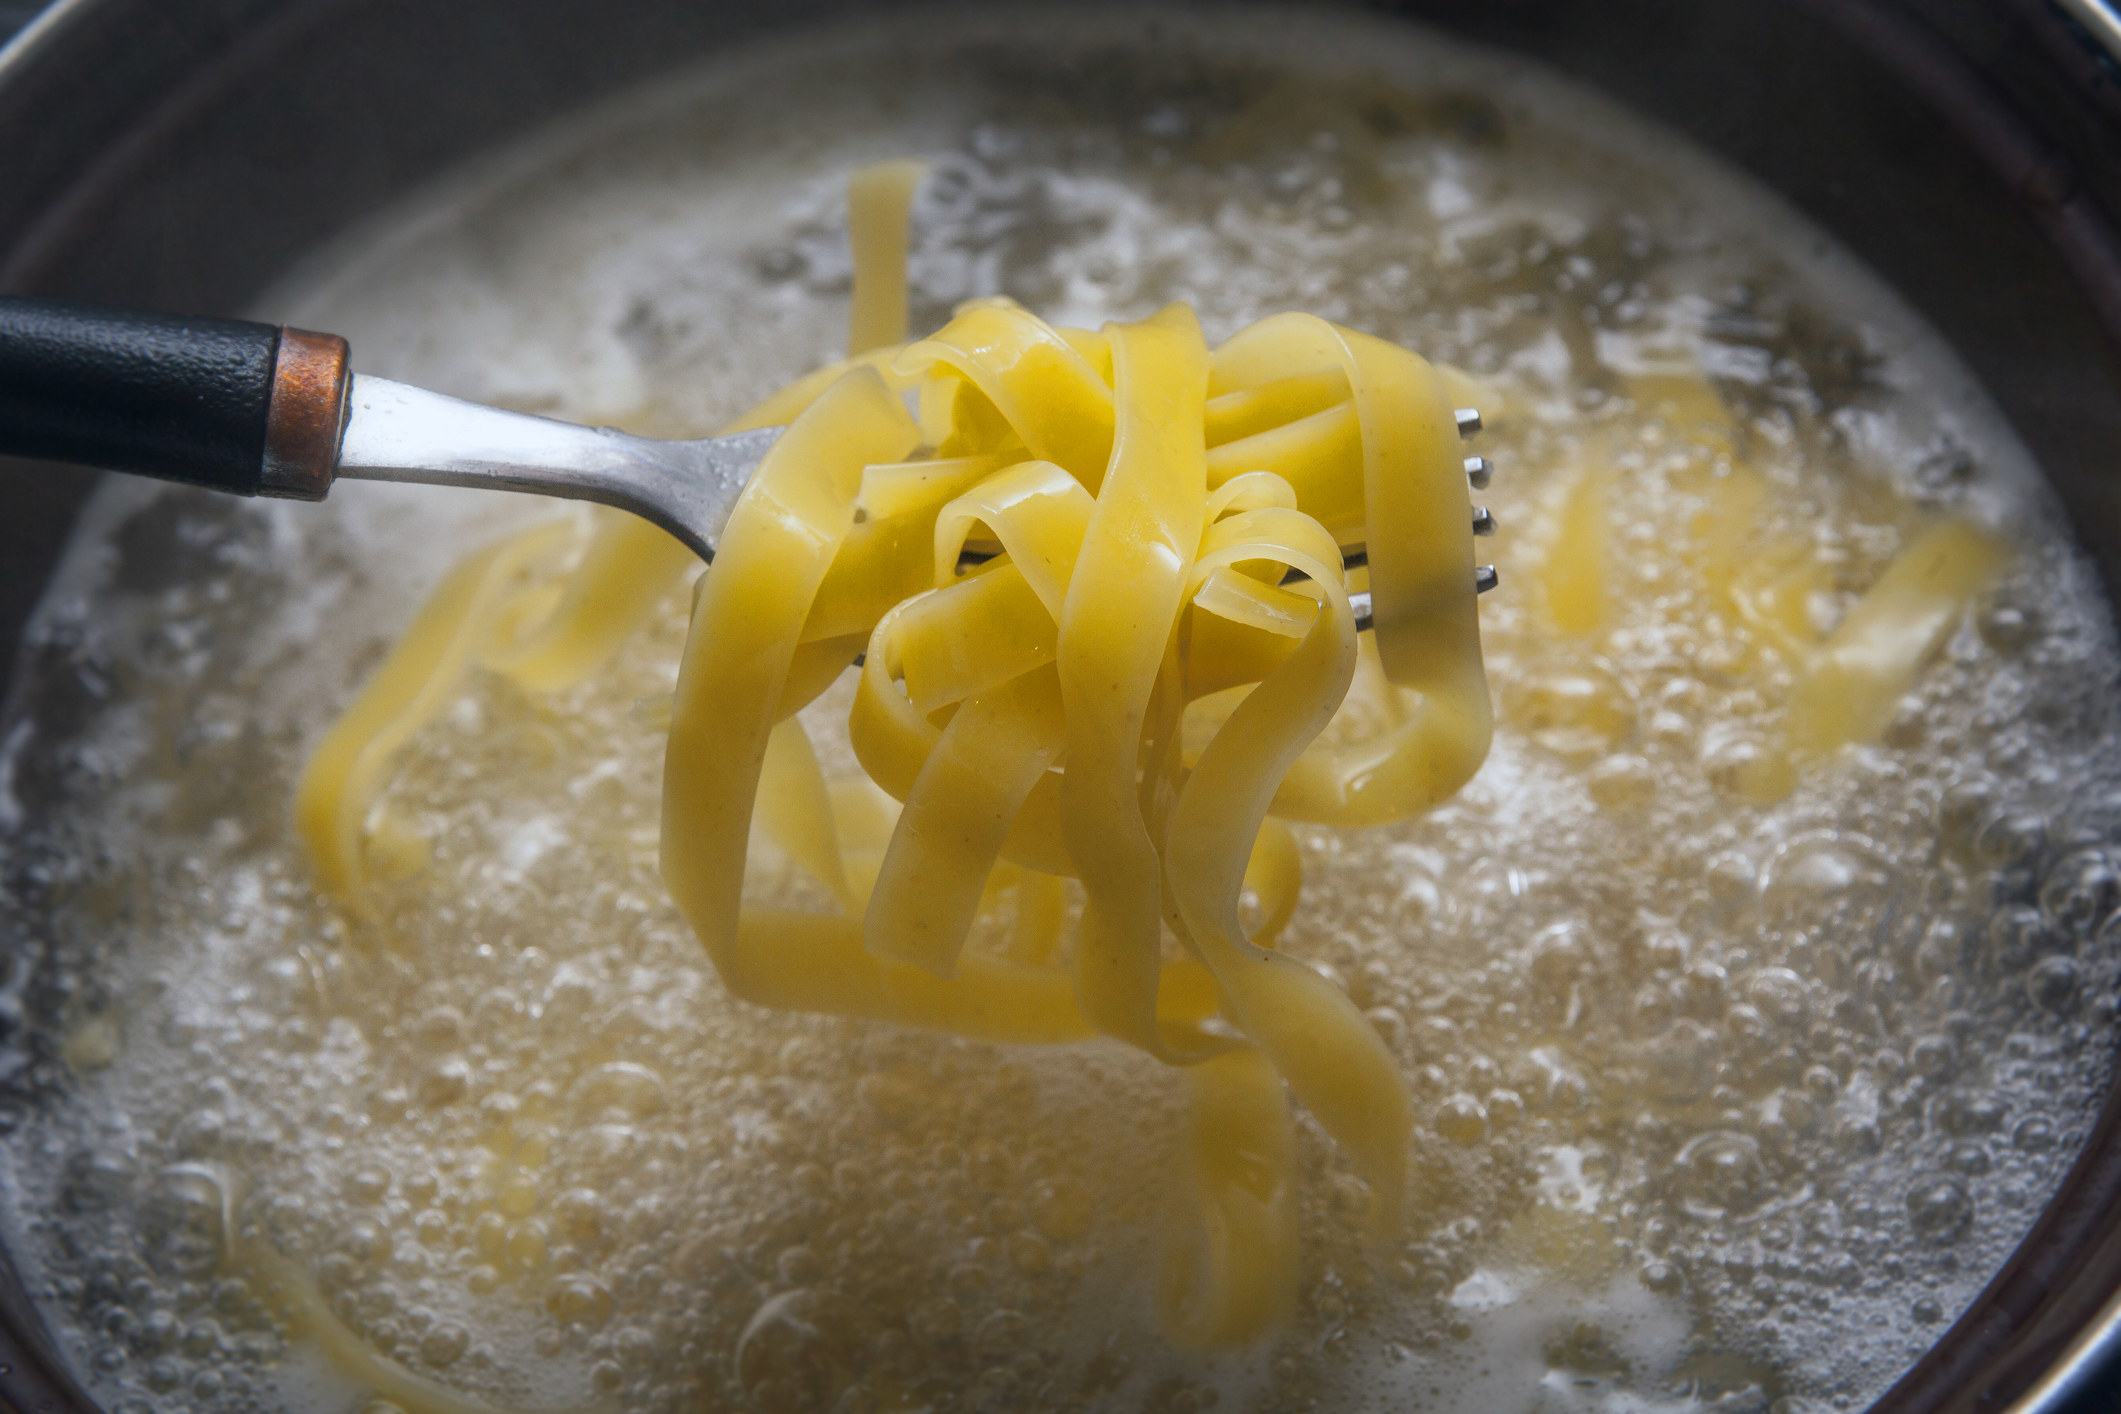 Removing cooked pasta from boiling water.